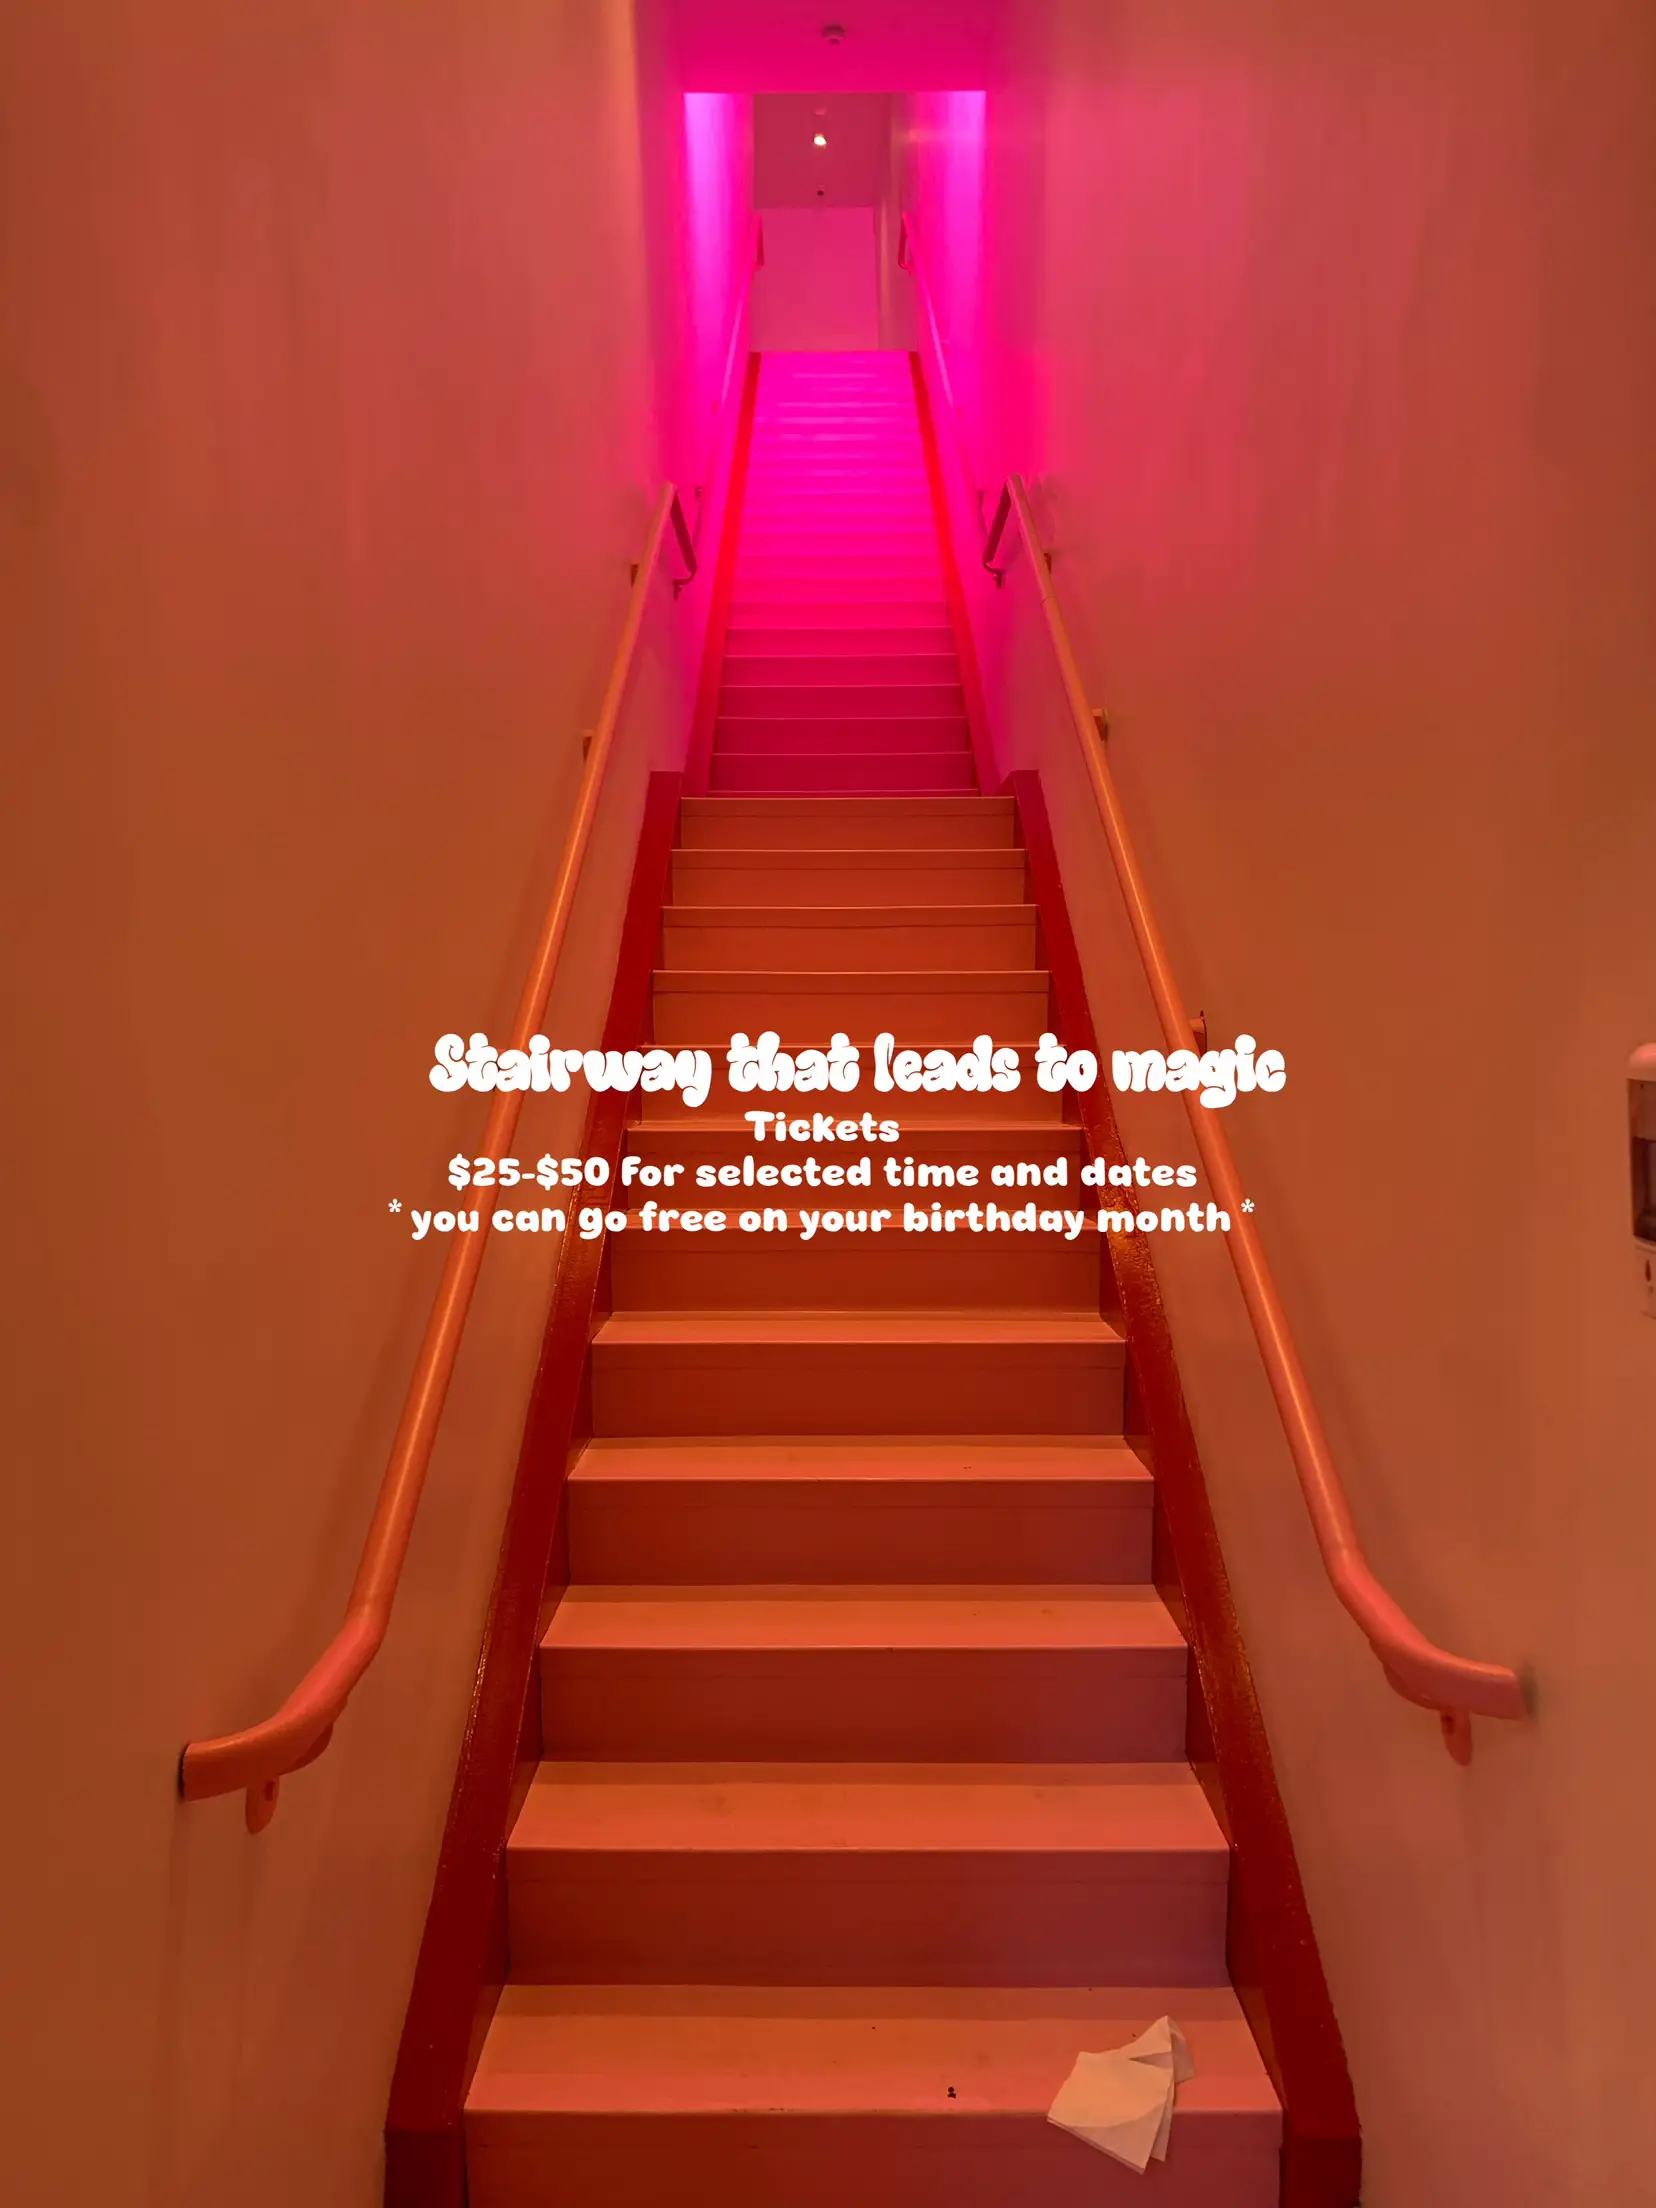  A stairway with a pink